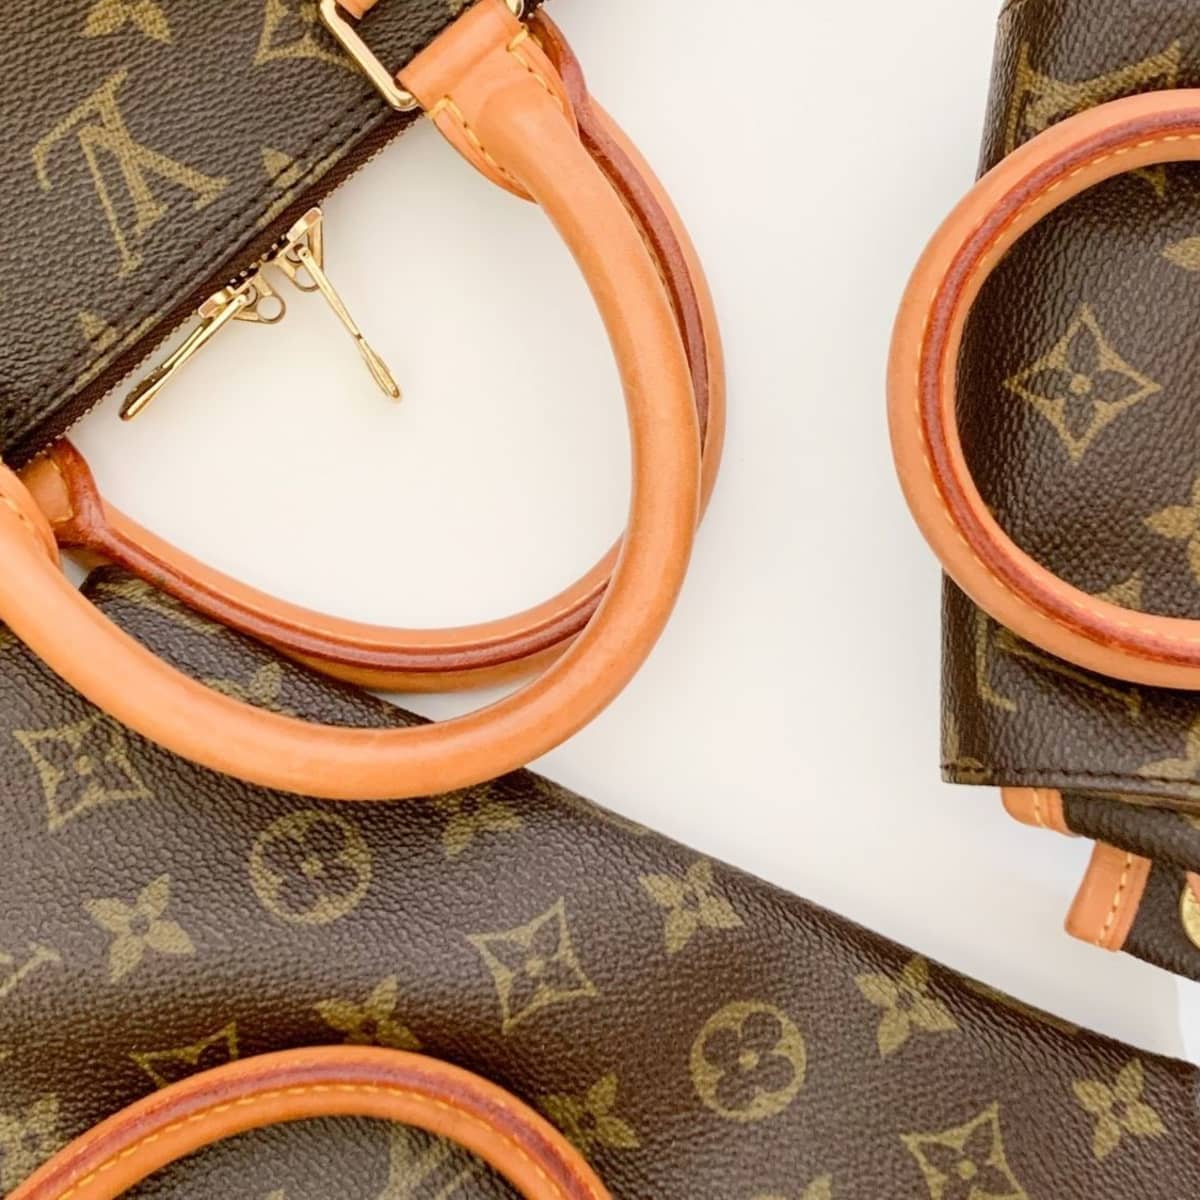 How to Buy Authentic Coach on : 5 Basic Ways to Tell If a Coach Purse  Is Real or Fake - Bellatory